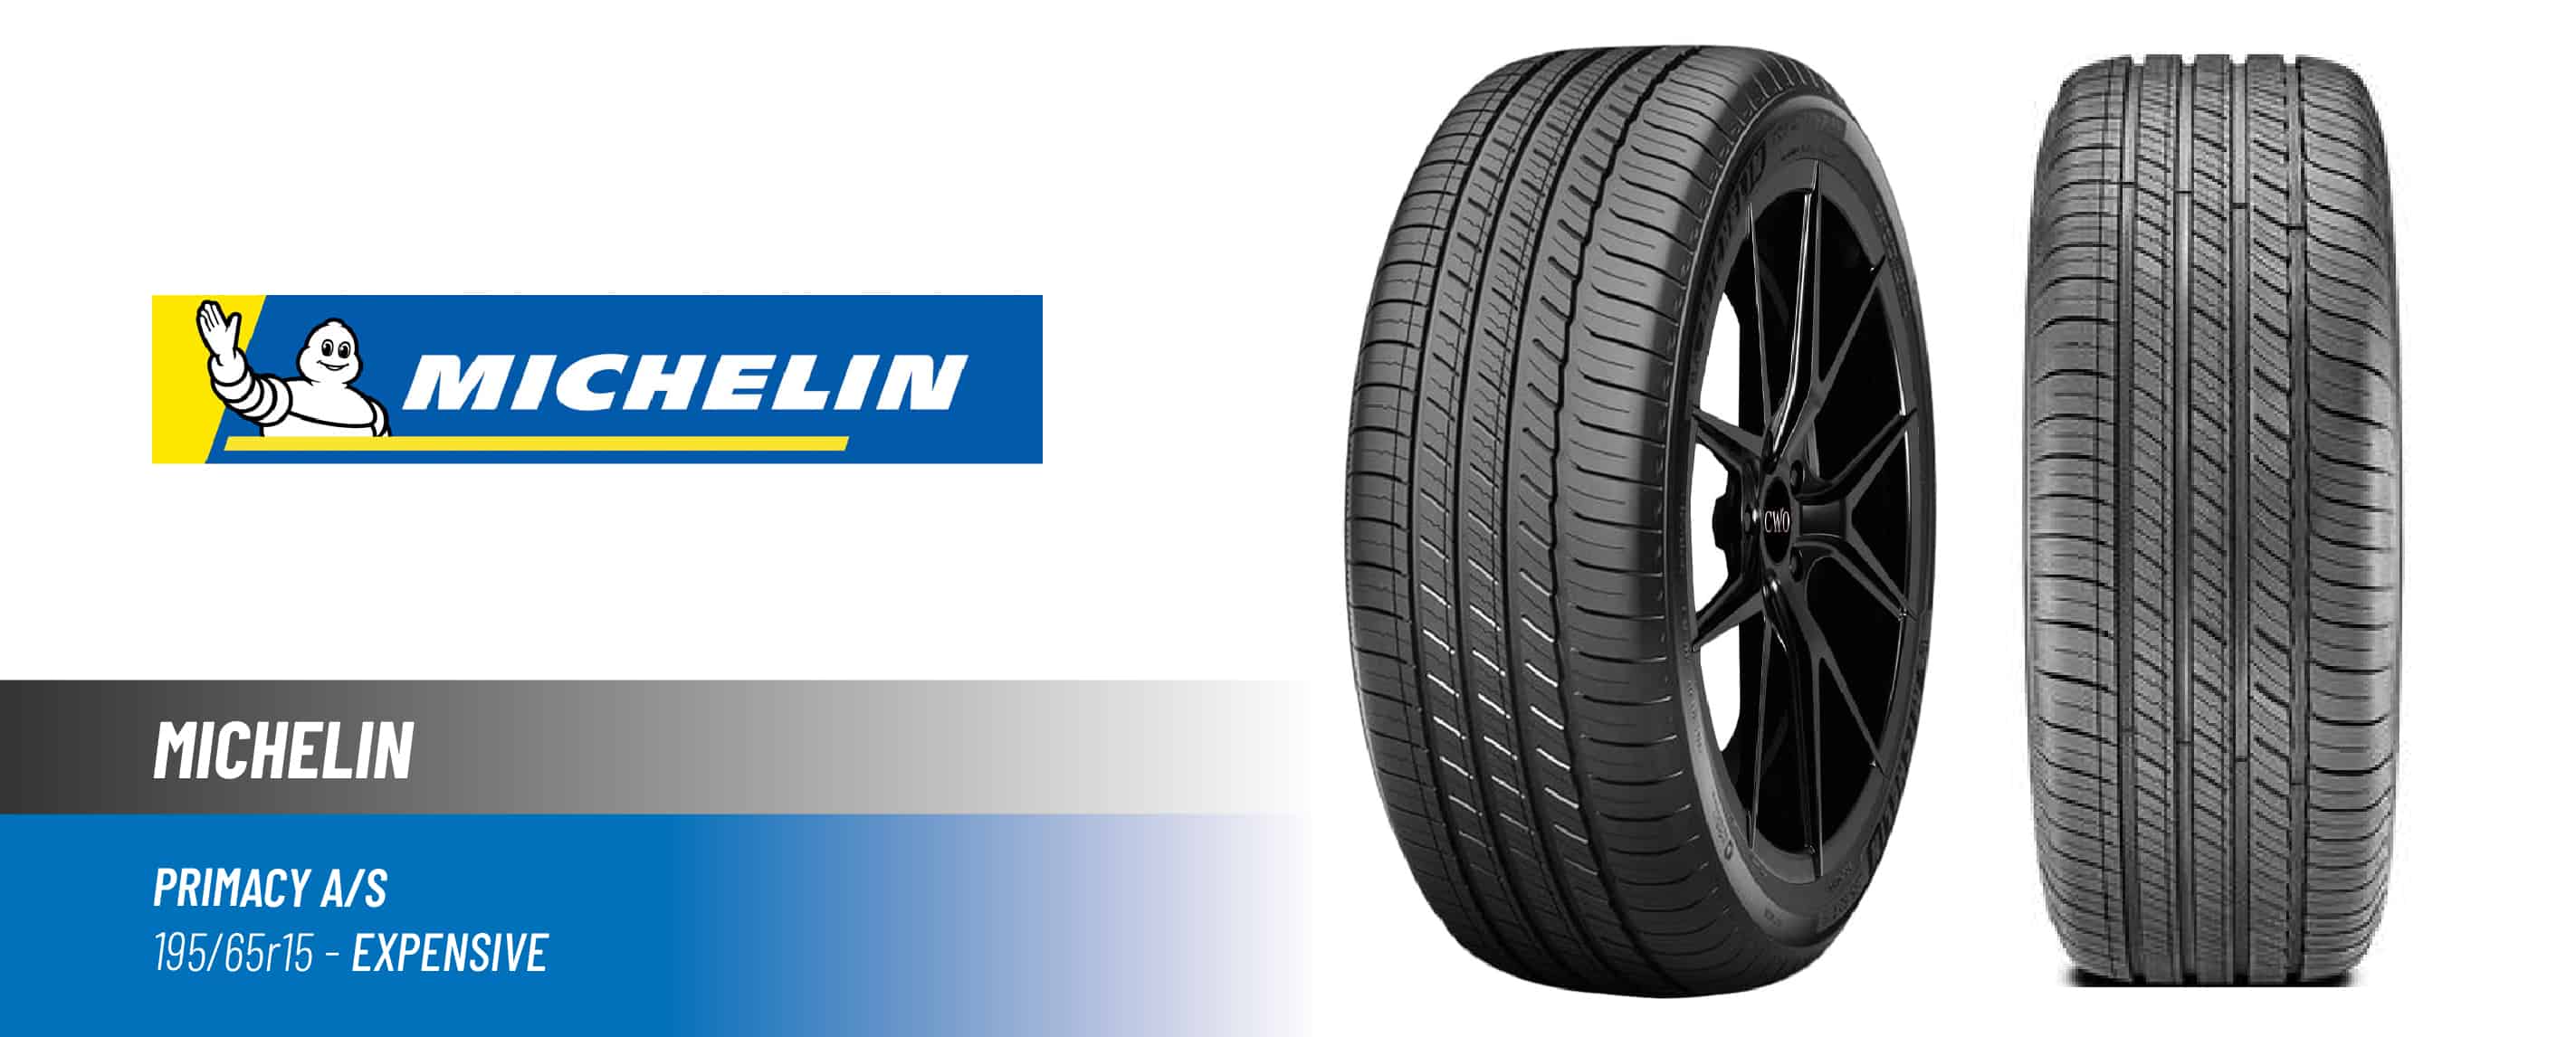 Top#3 Most Expensive: Michelin Primacy A/S – 195/65 R15